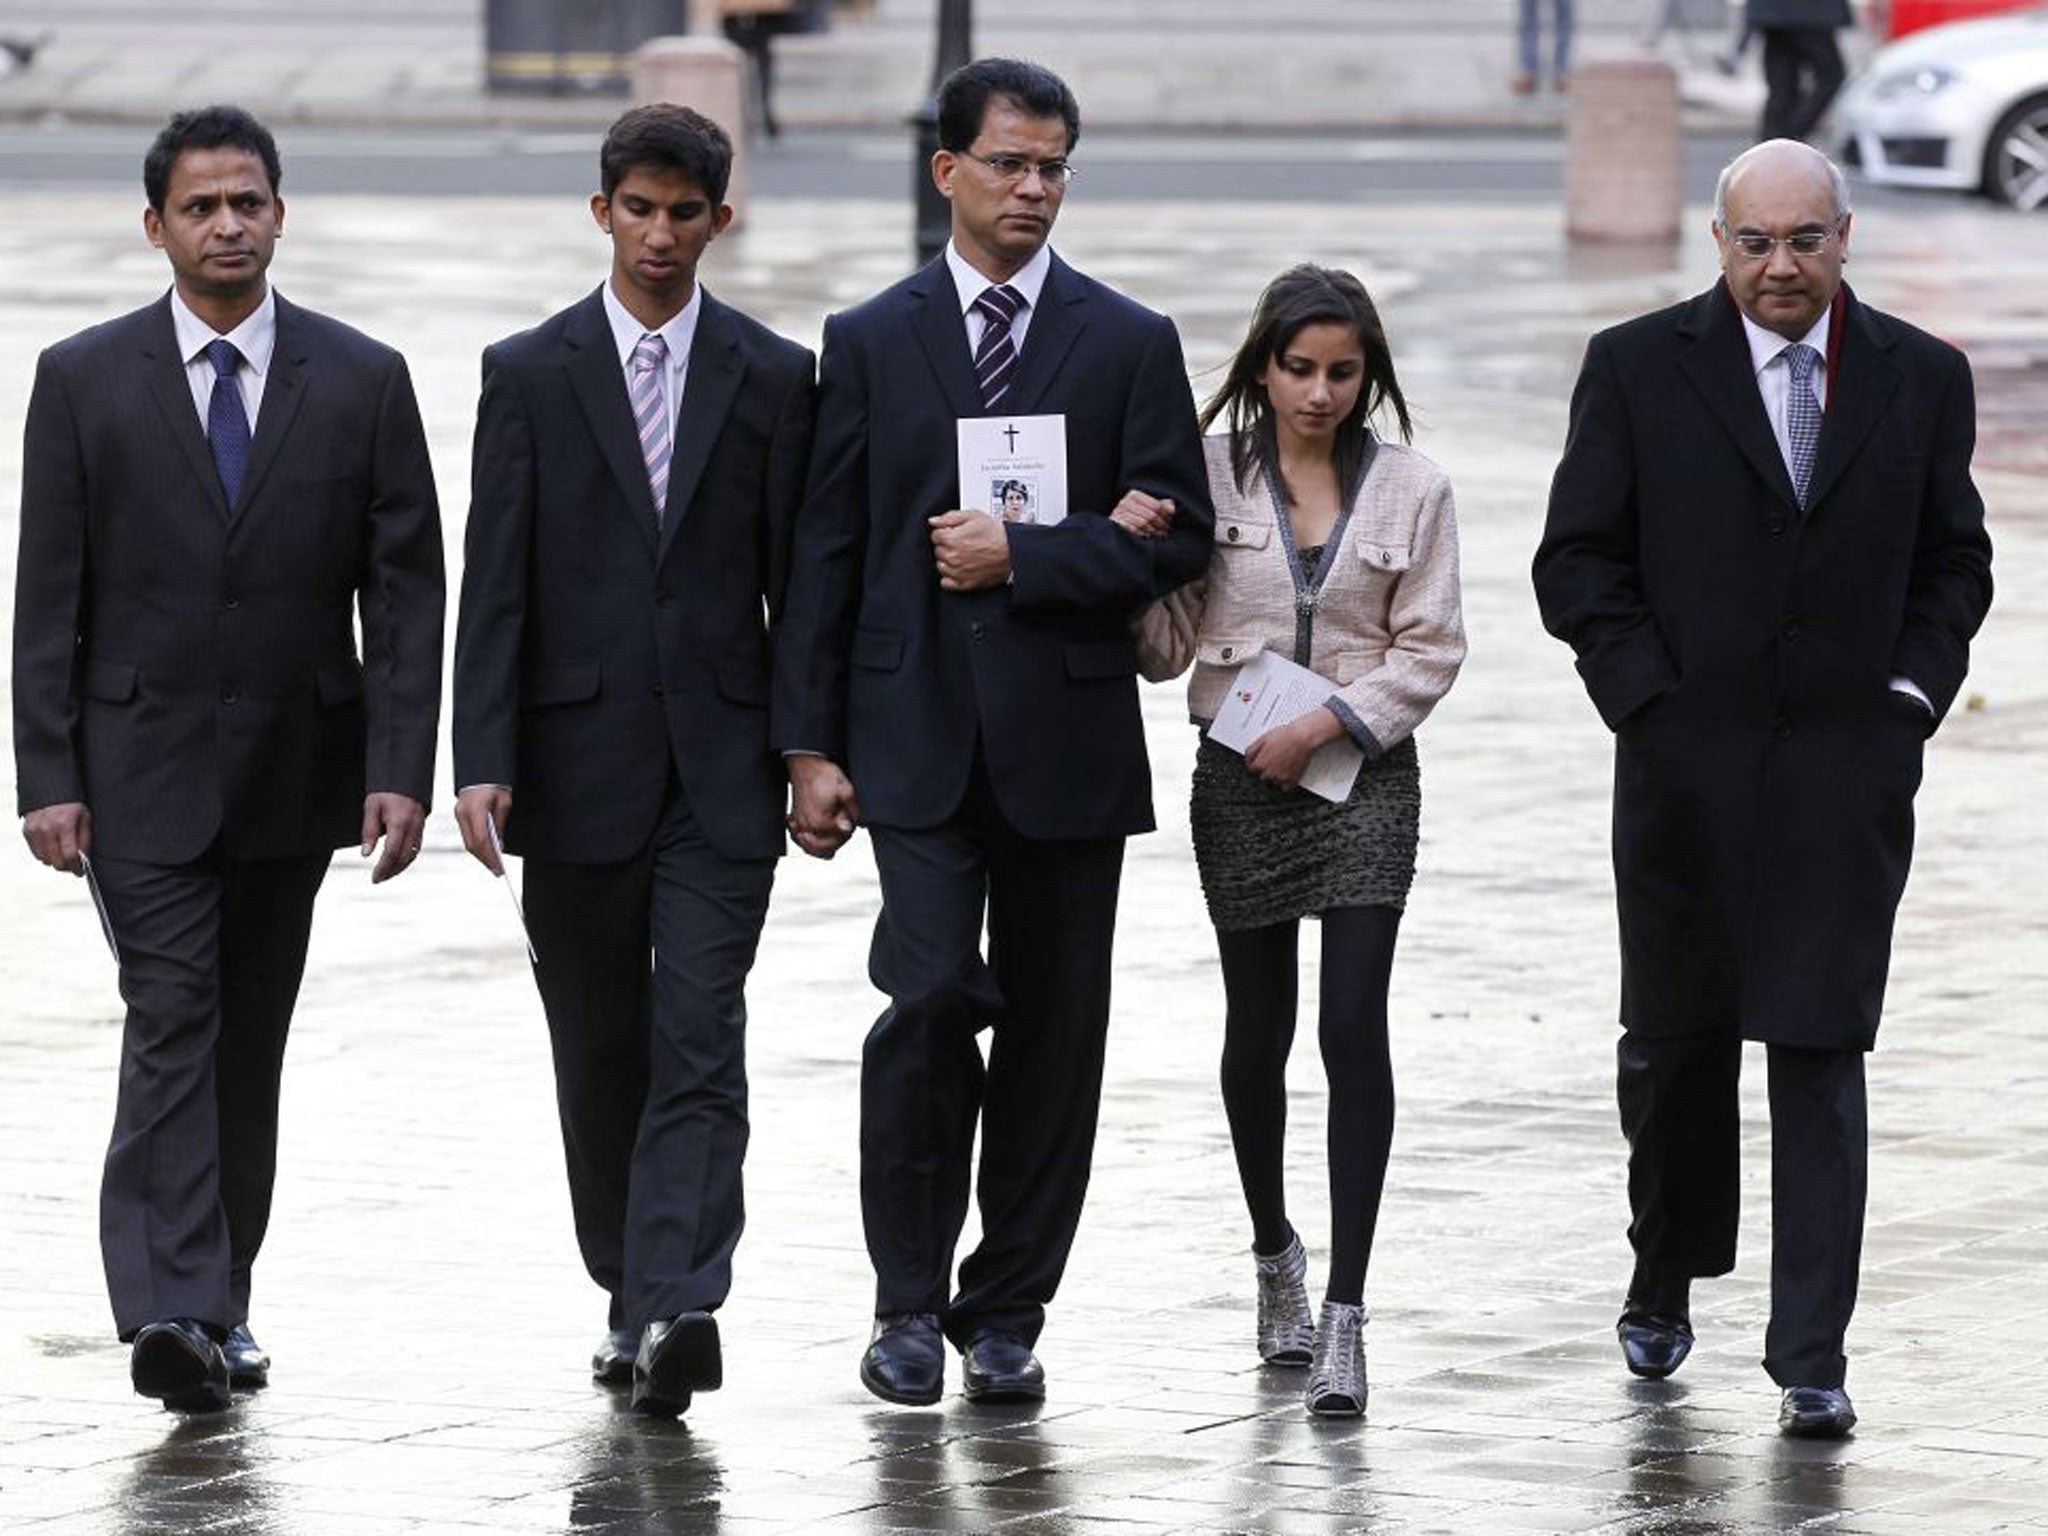 Husband of late Jacintha Saldanha, Benedict Barboza, centre, son Junal, 16, second left, daughter Lisha, 14, second right, accompanied by Keith Vaz MP, right, arrive at Westminster Cathedral for a memorial service